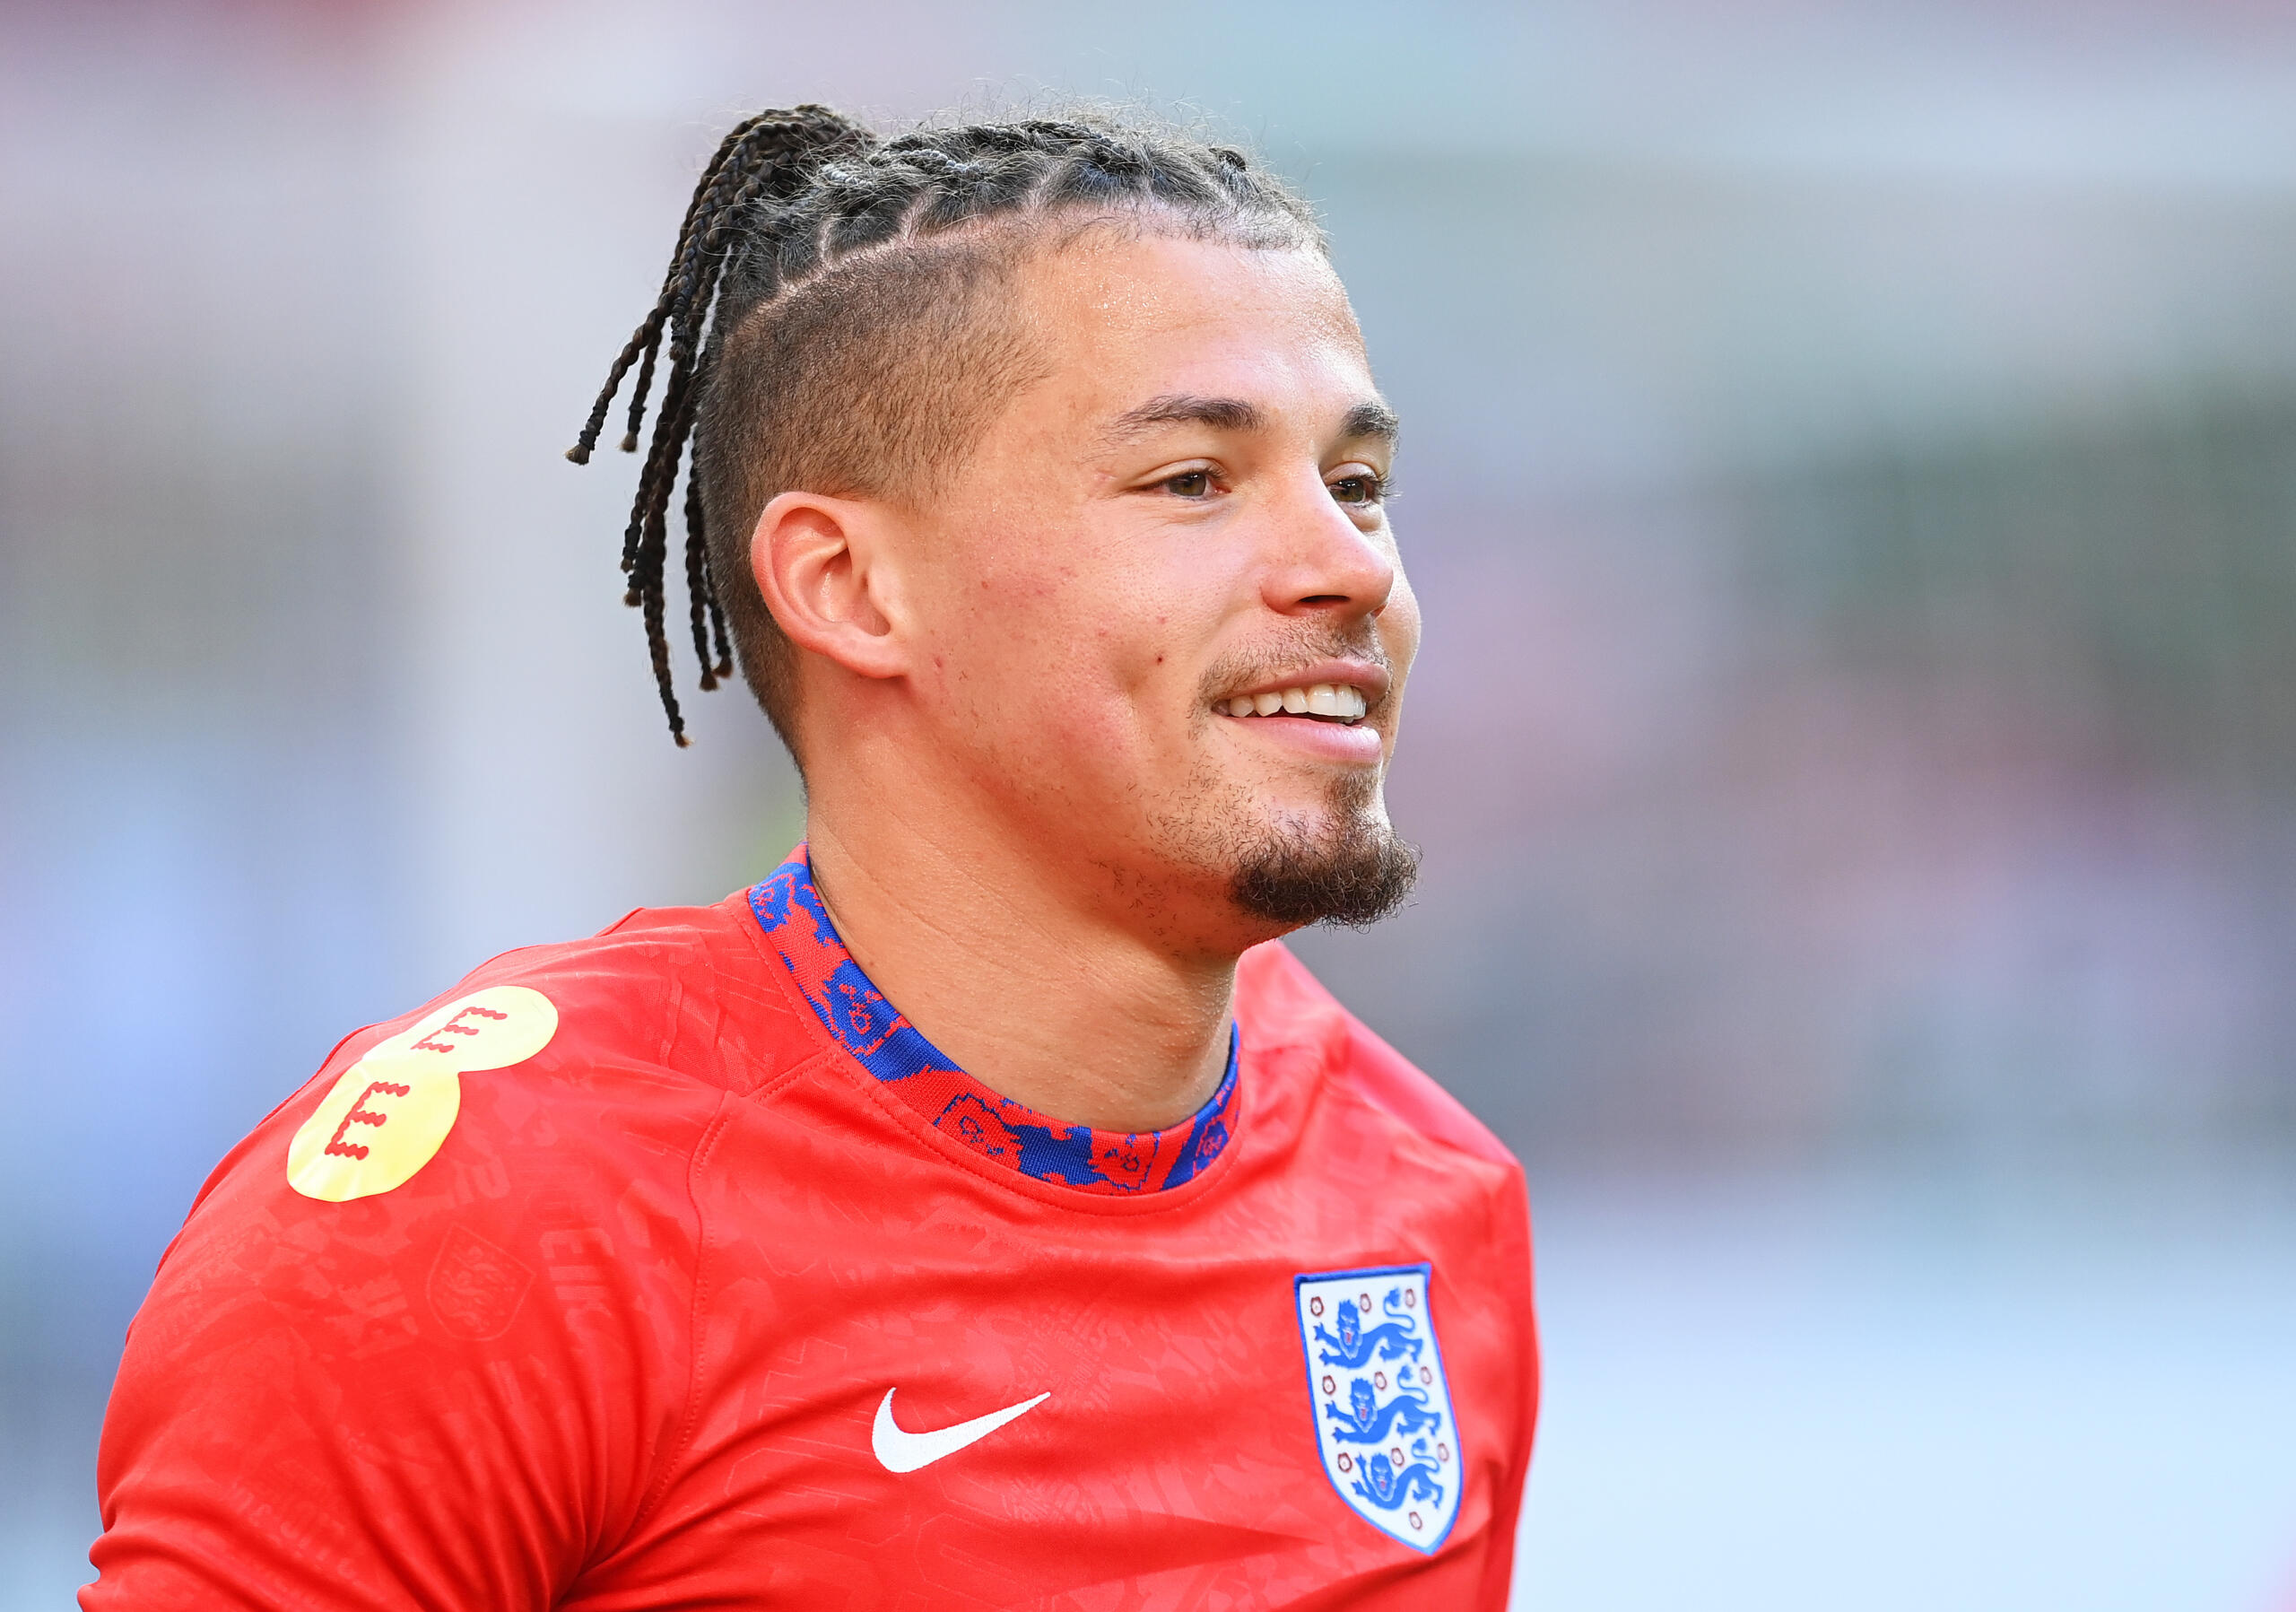 The apical Juventus execs had a brief but productive trip to England, making strides in their pursuit of Kalvin Phillips.